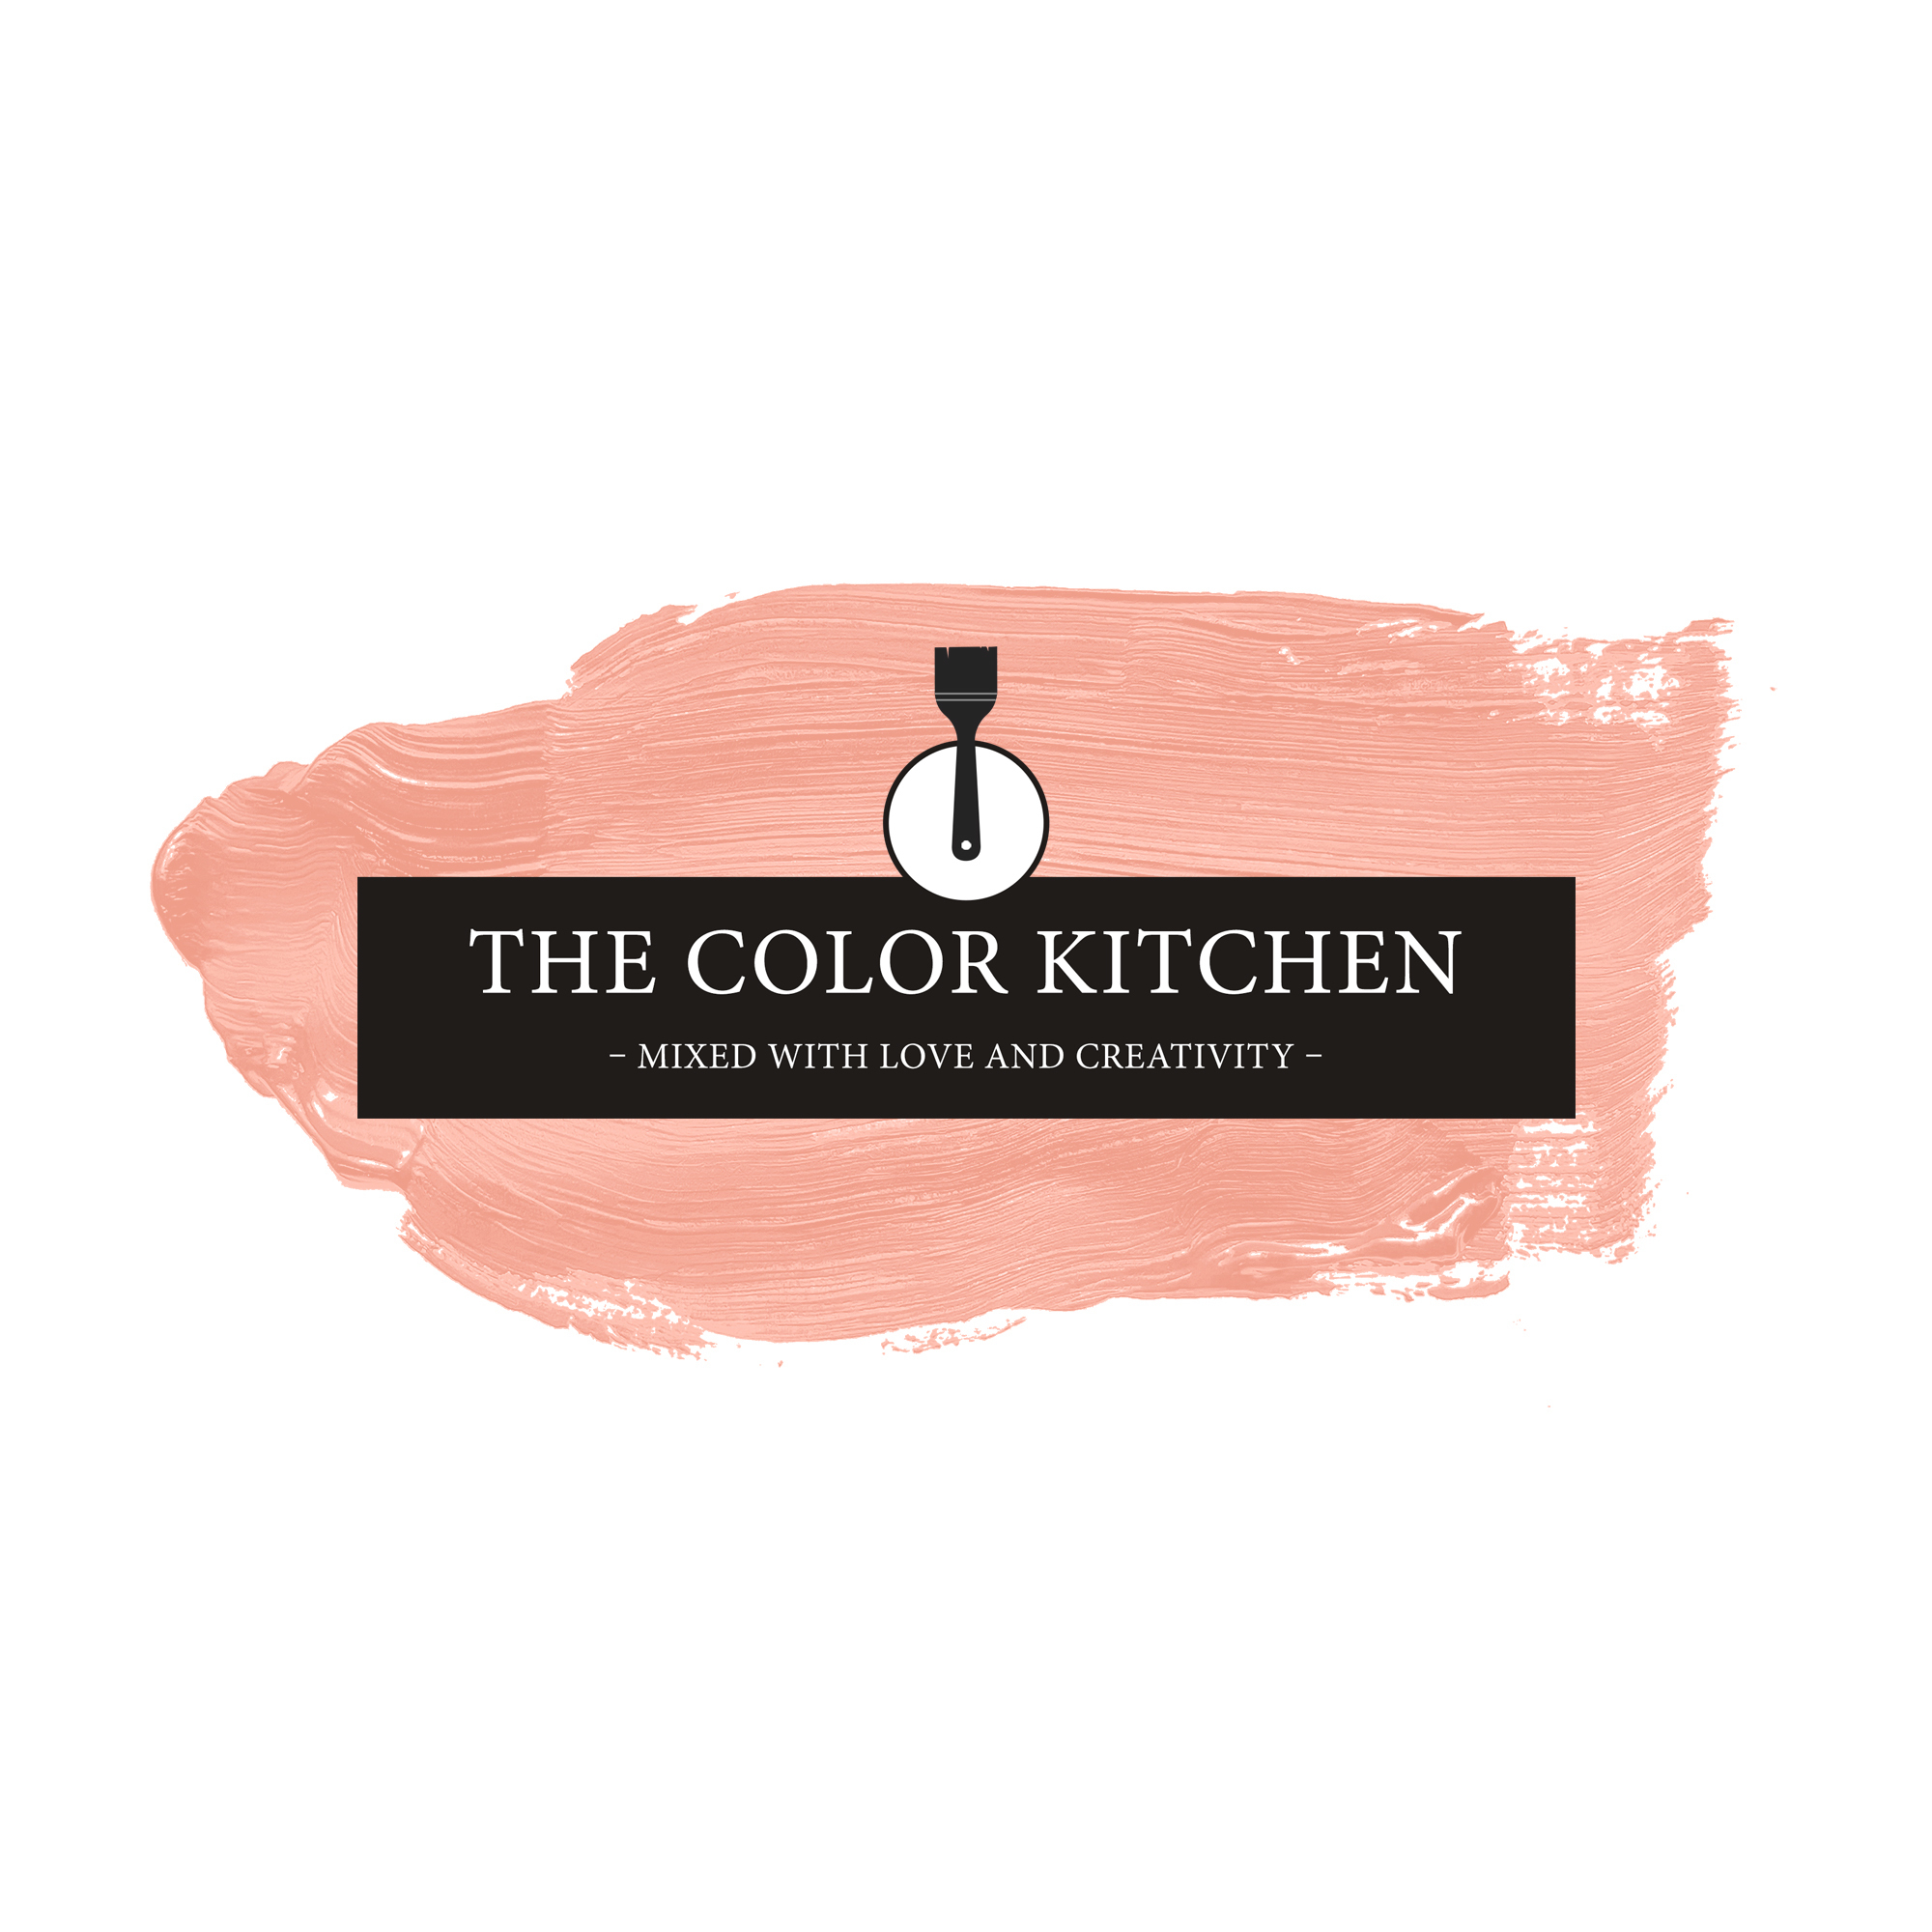 The Color Kitchen Lucky Litchi 5 l